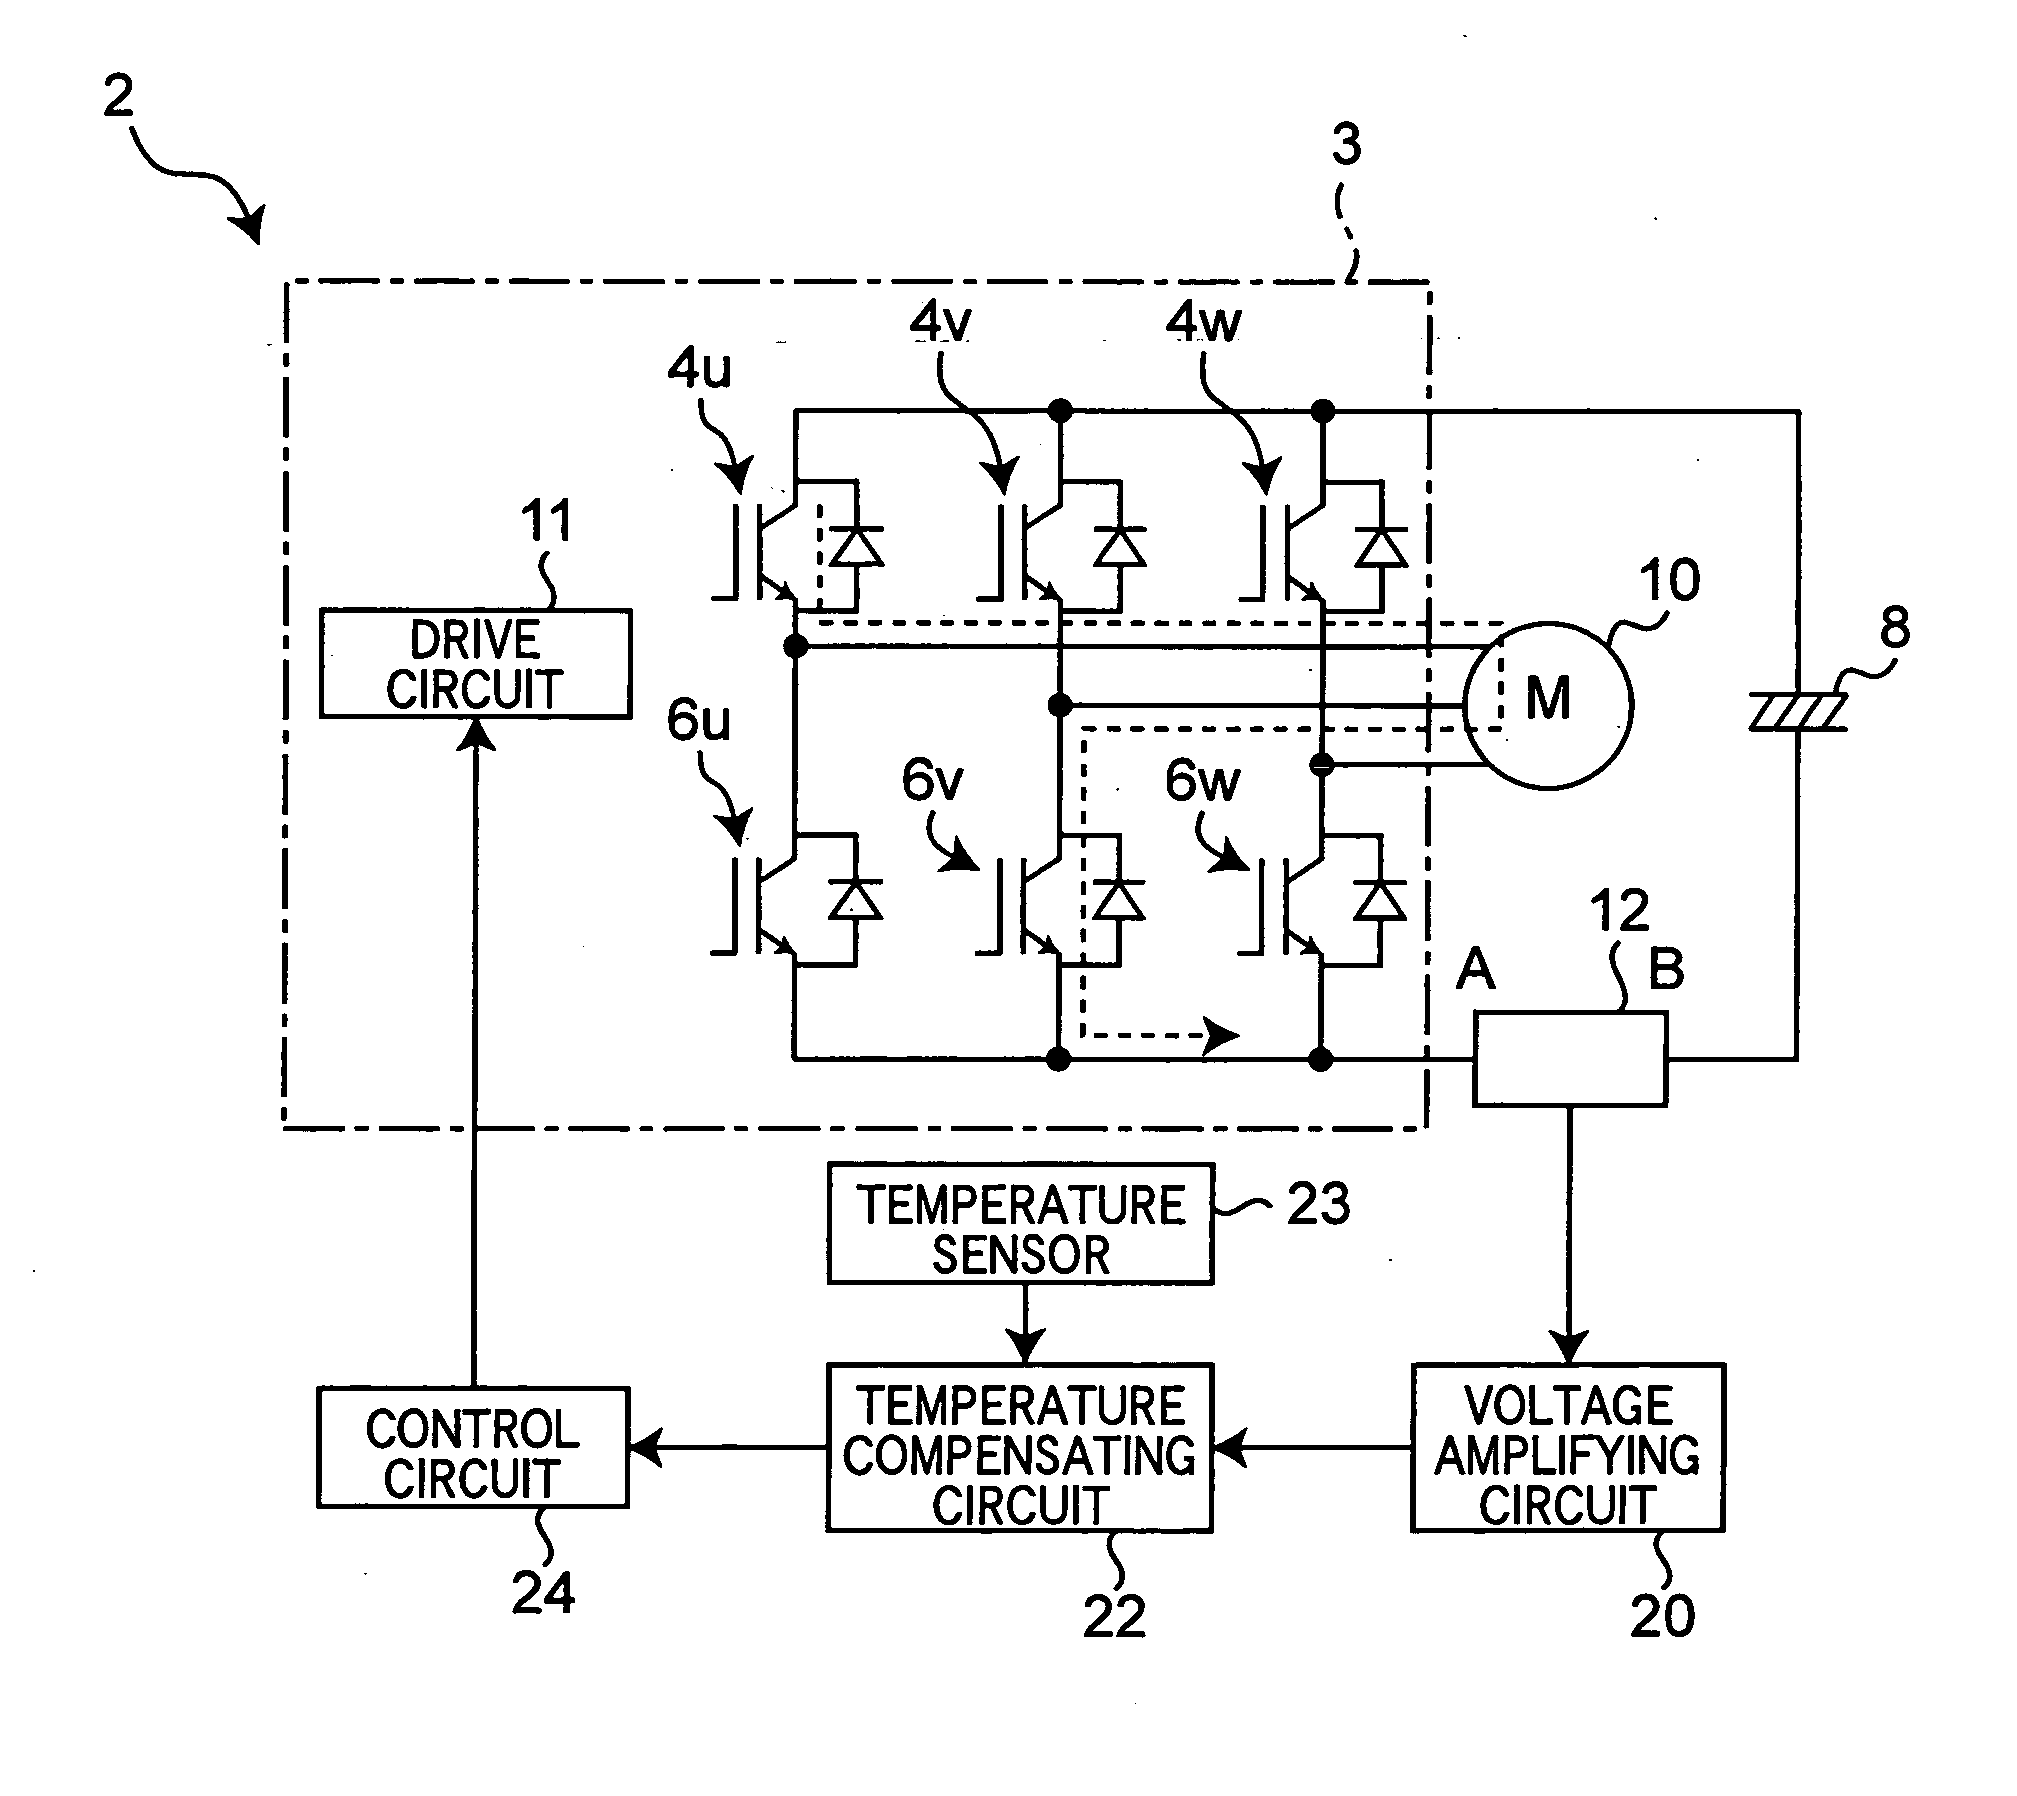 Power semiconductor module with detector for detecting main circuit current through power semiconductor element